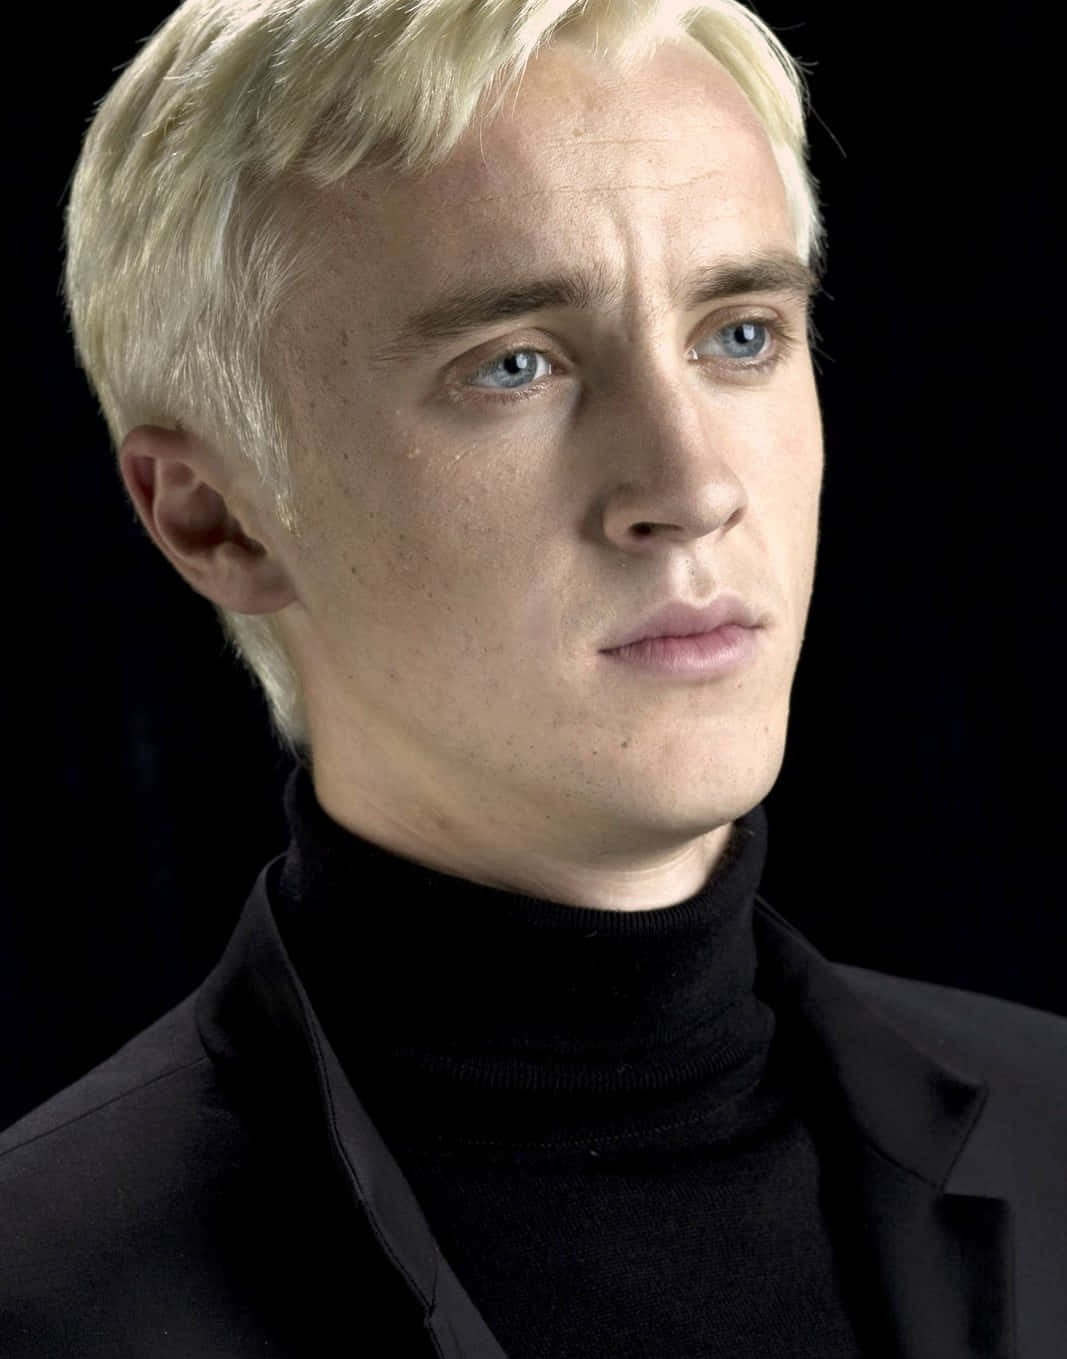 Download Draco Malfoy - Harry Potter's Slytherin Nemesis | Wallpapers.com